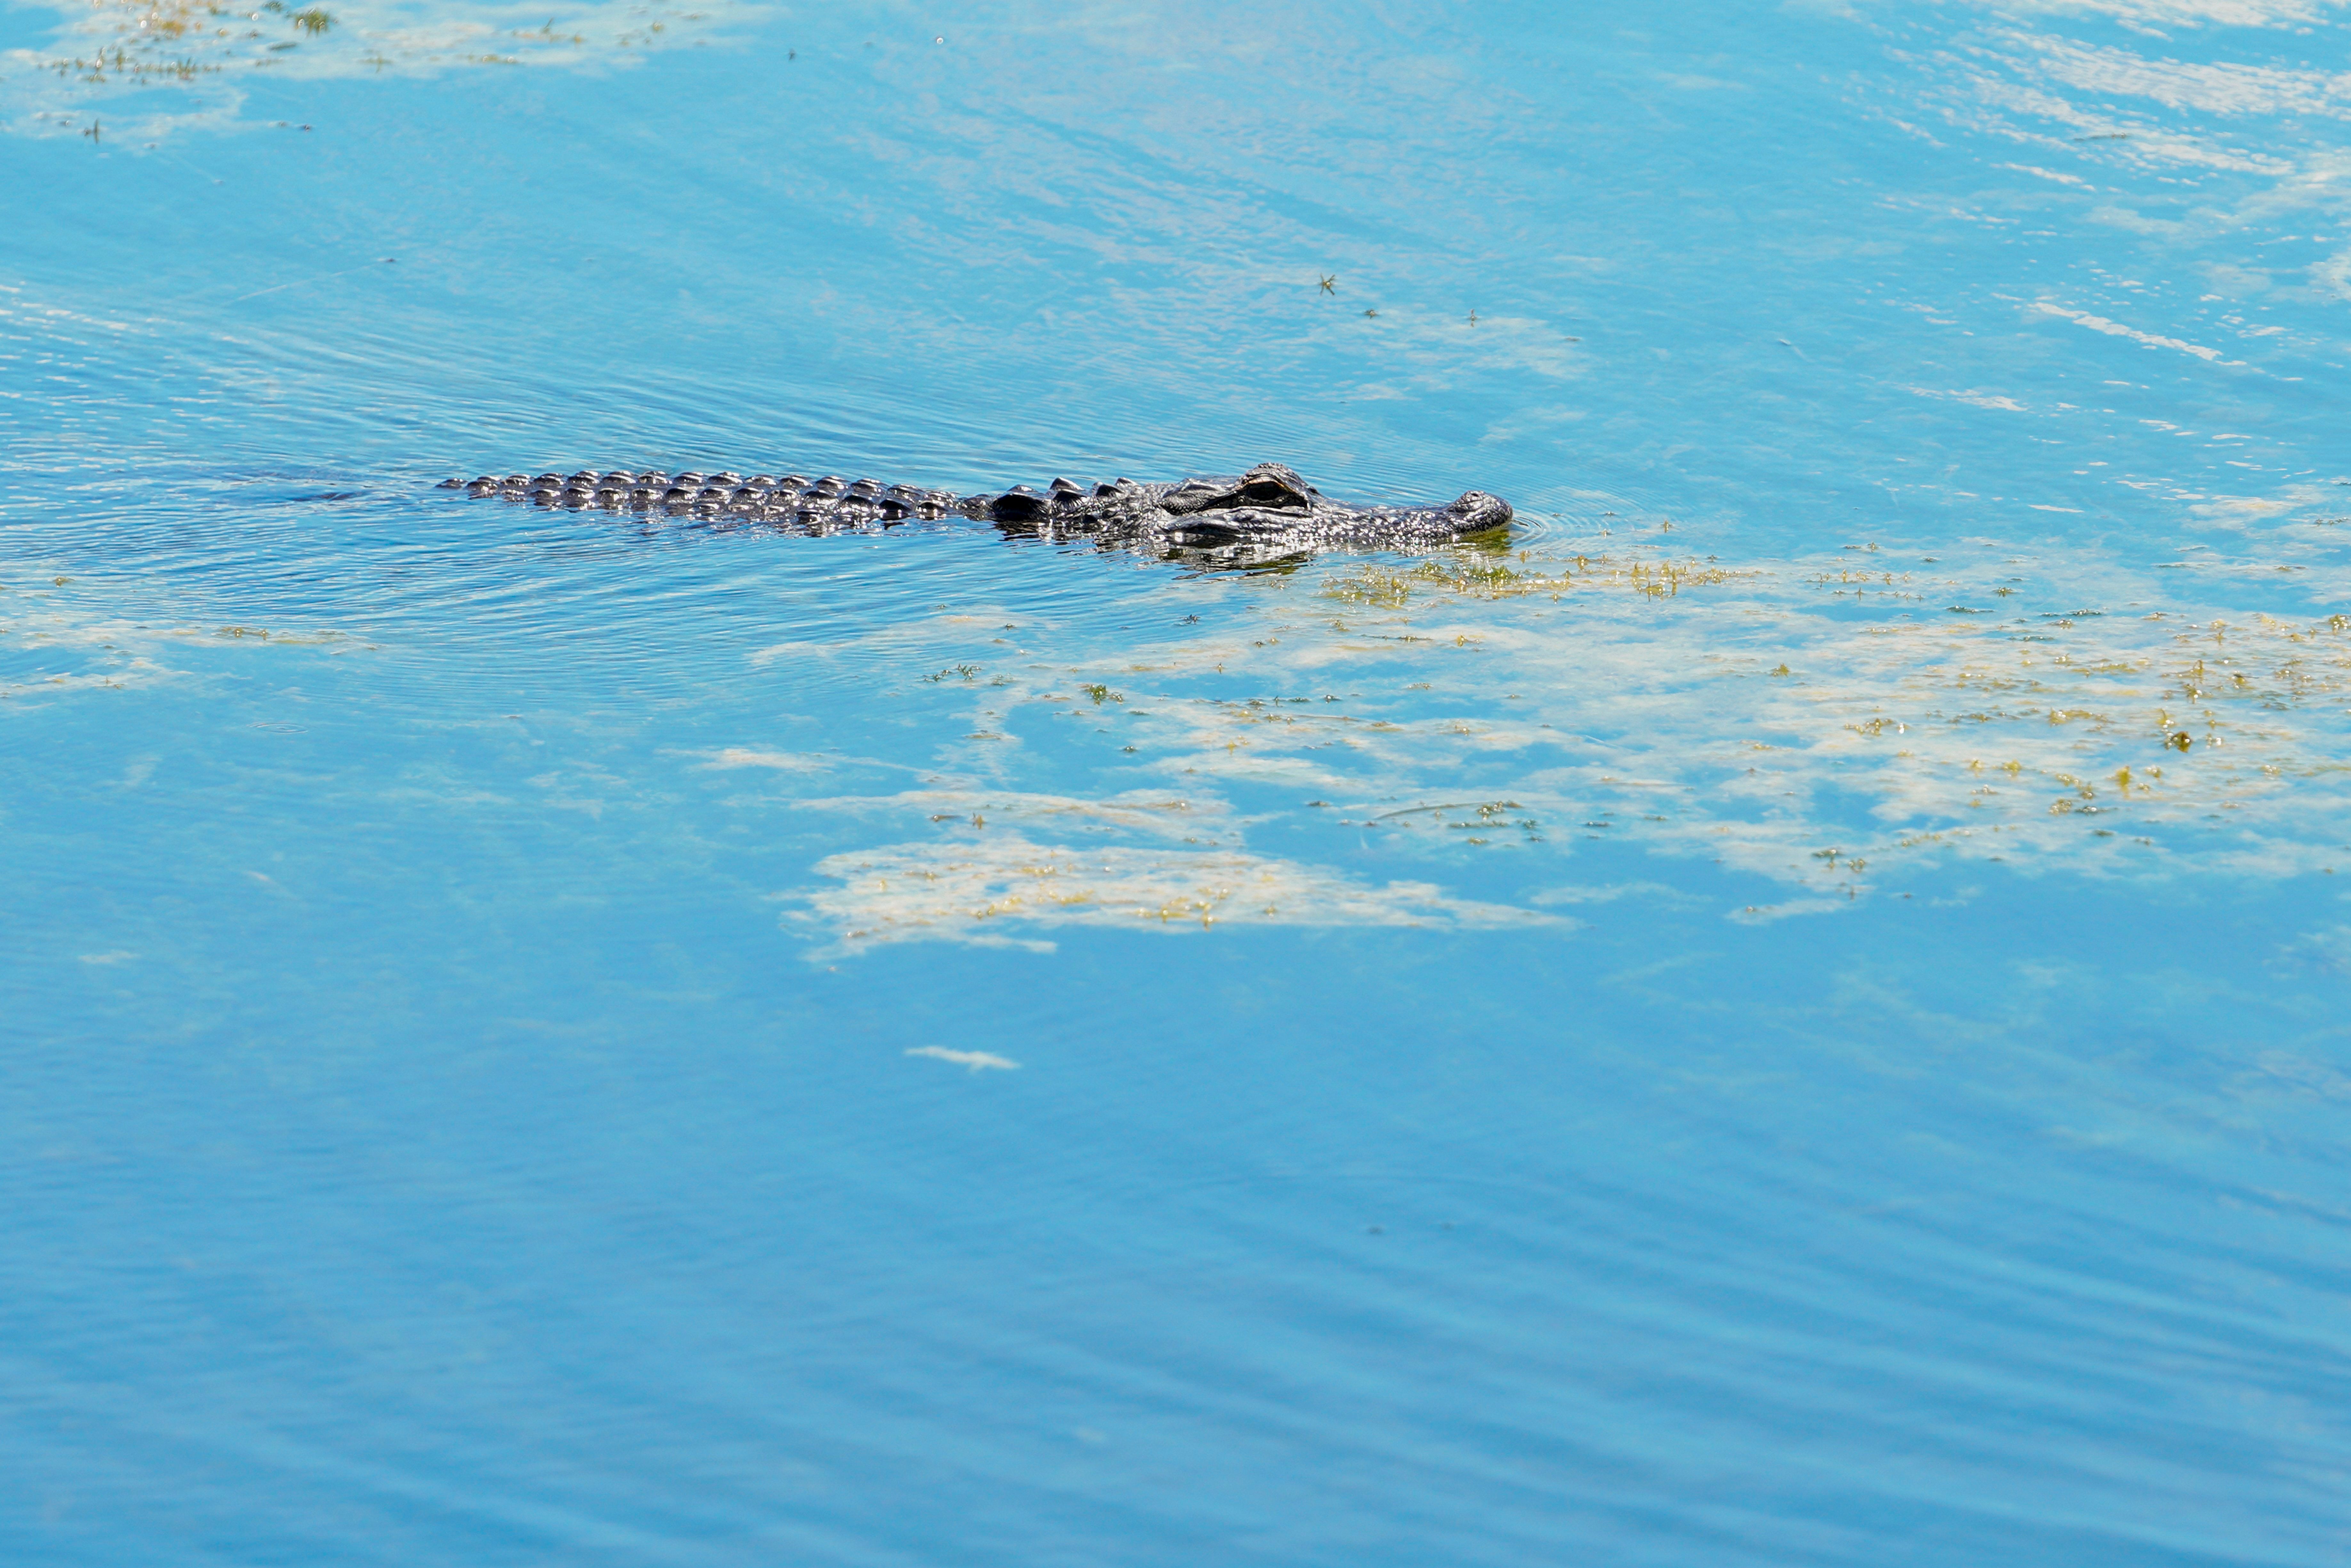 An alligator swims in Taylor Lake near the scene where a man was found dead after going into the water to retrieve lost disc golf discs at John S. Taylor Park, Tuesday, May 31, 2022 in Largo, Fla